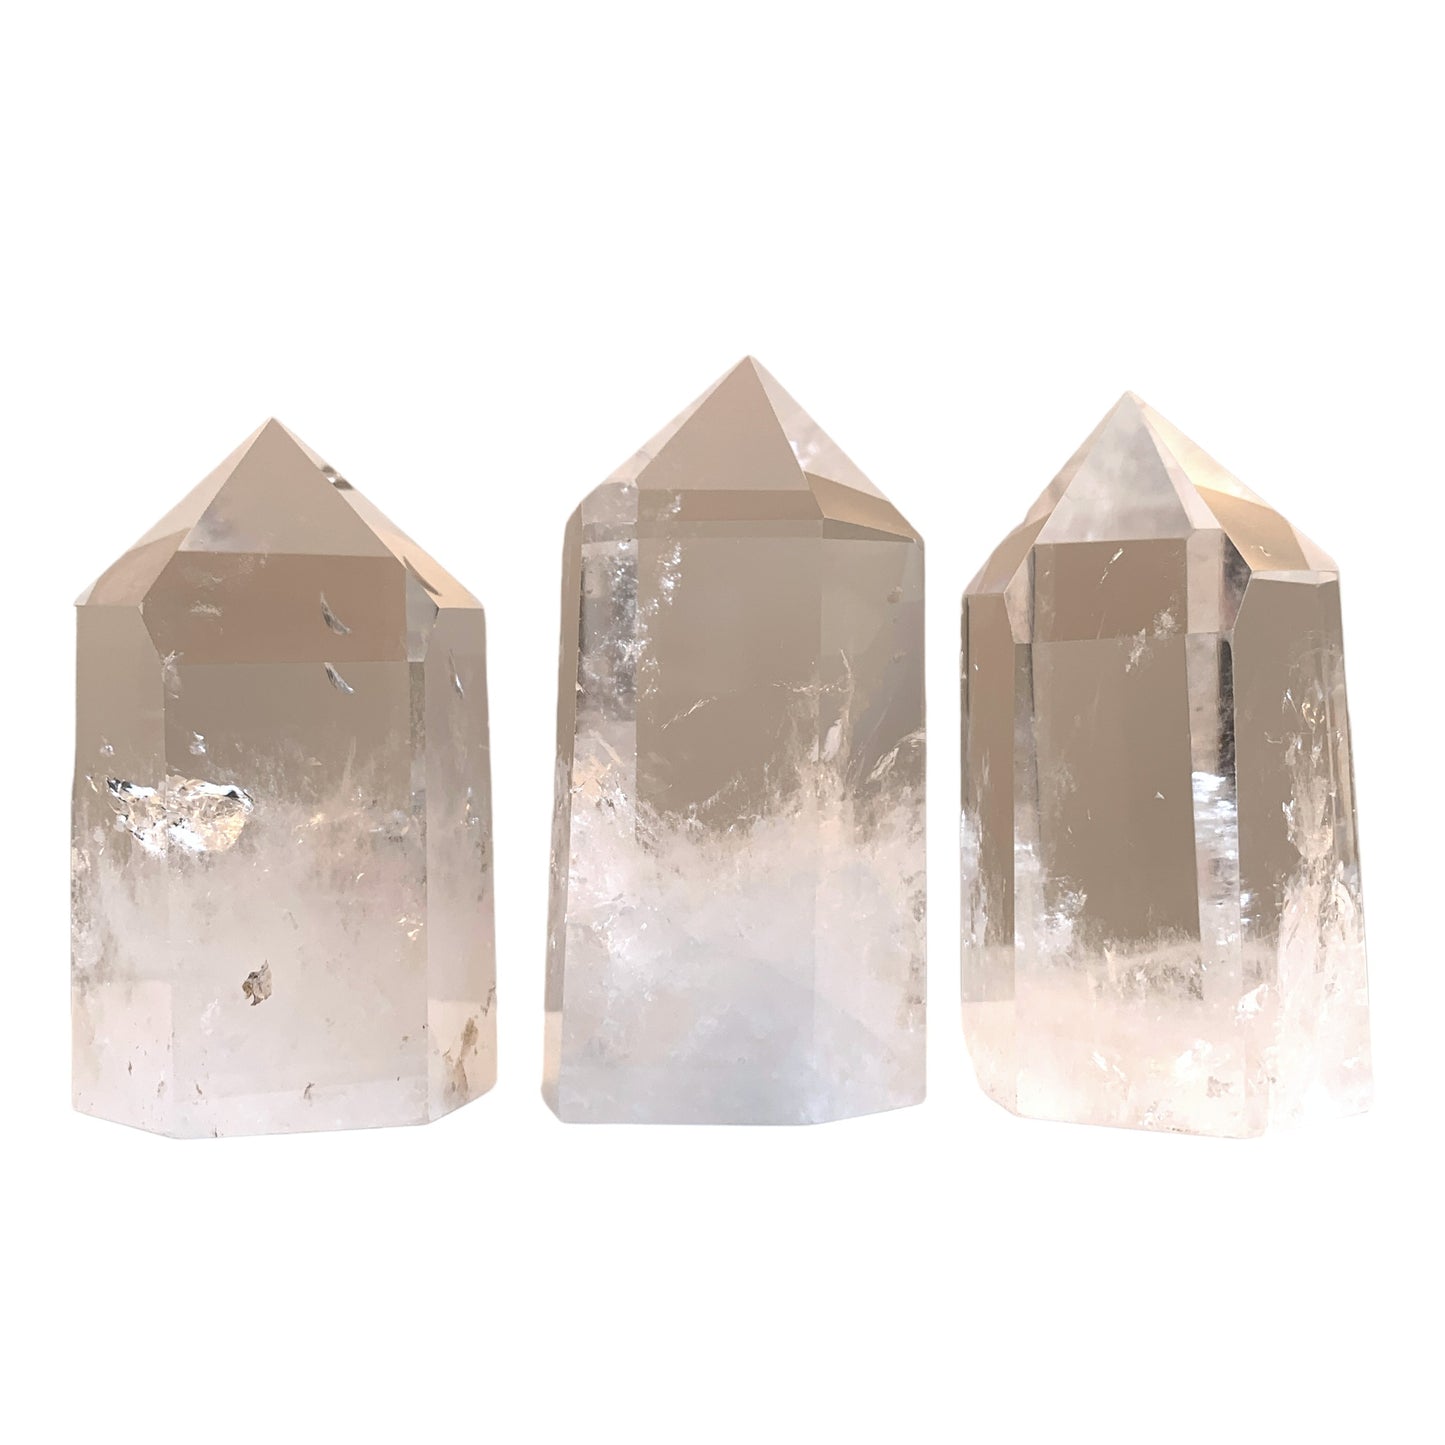 CRYSTAL QUARTZ - Polished Points - 2.75 to 4 inch 7-10cm - Price per gram - China - NEW821